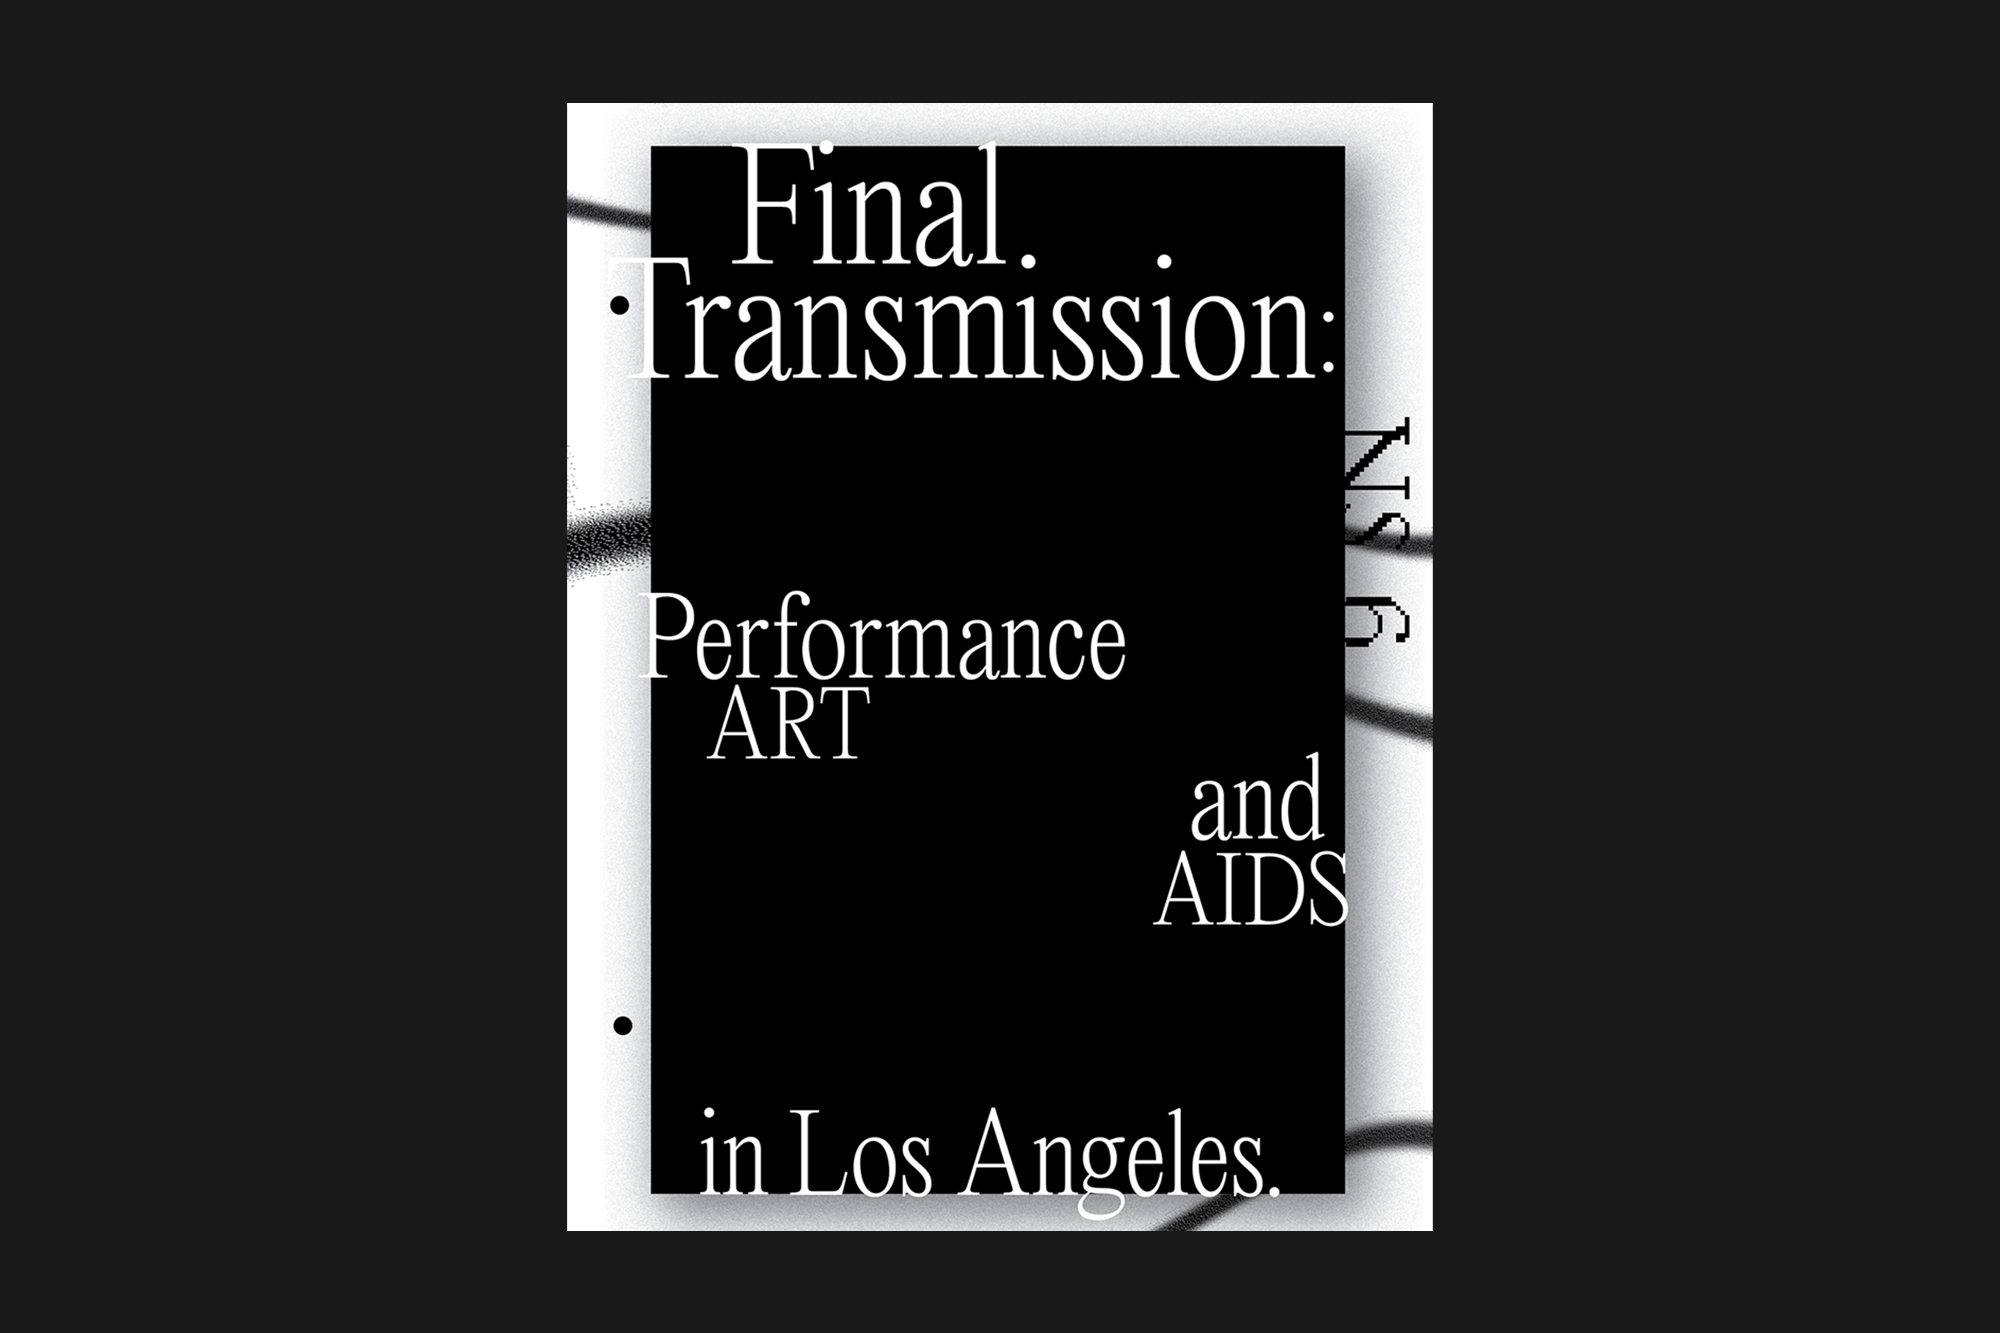 THe cover of the book reads: Final Transmission: Performance Art and Aids in Los Angeles